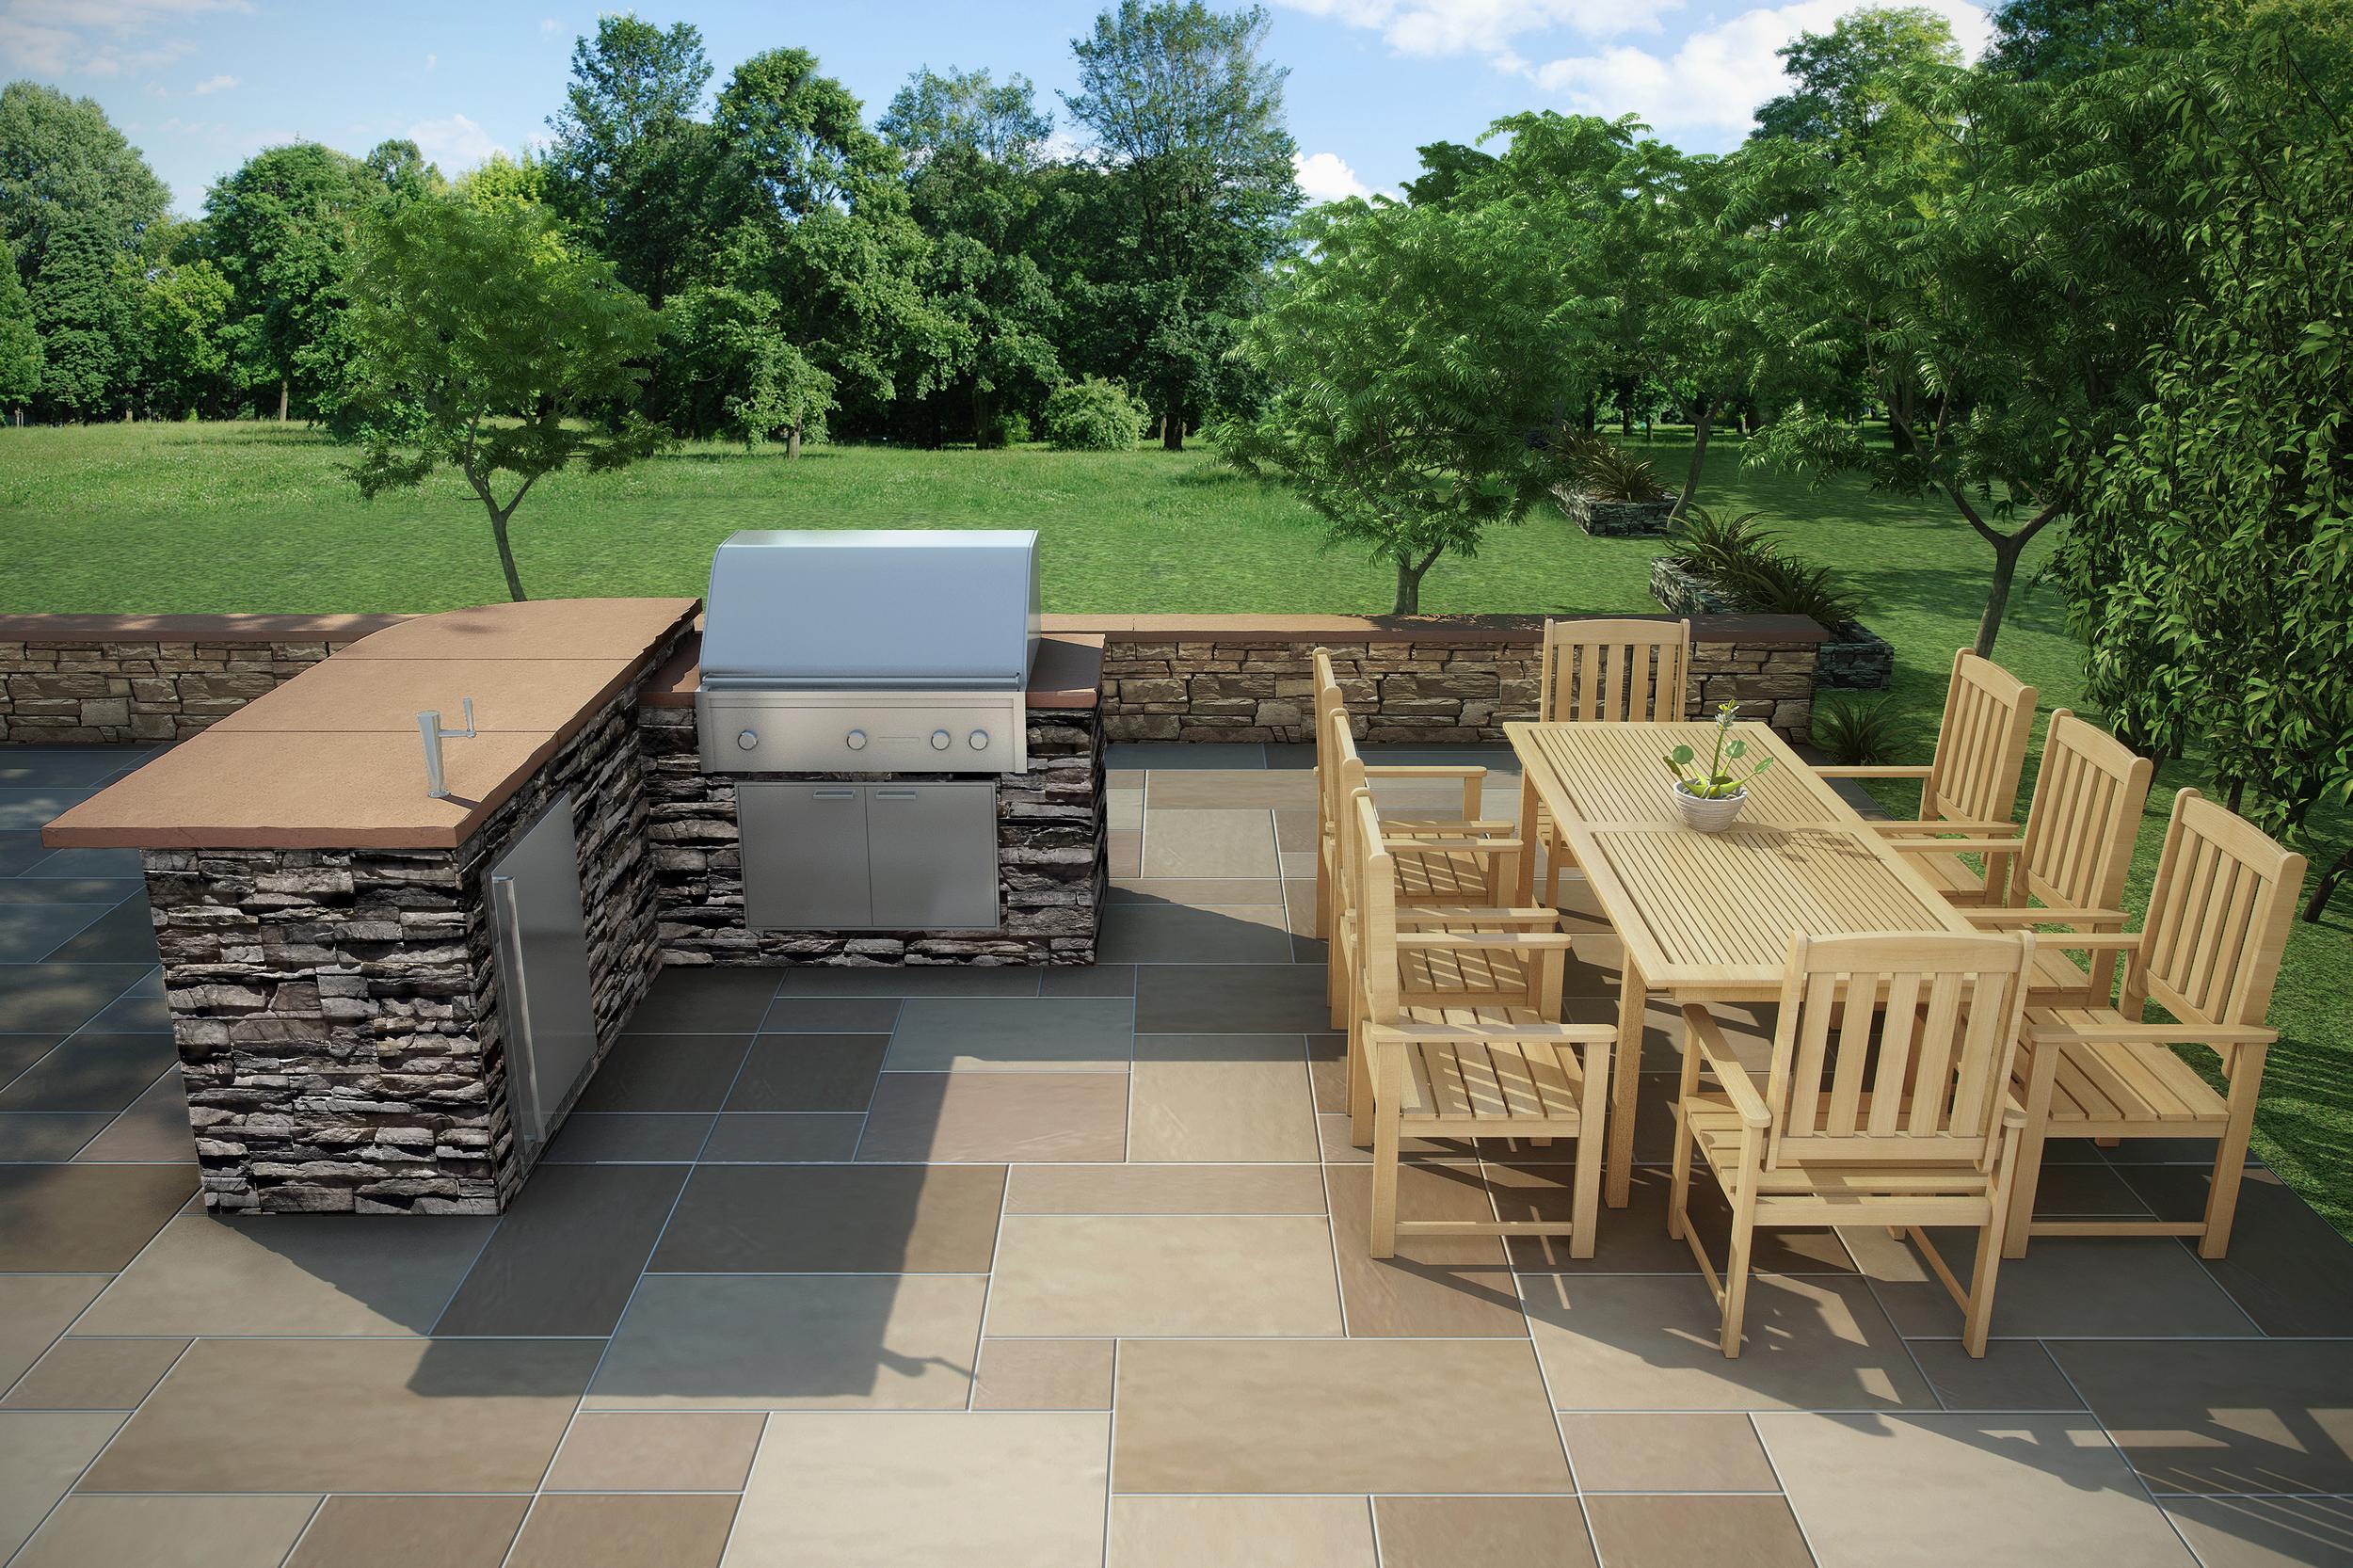 Outdoor Kitchen rendering from Kindred Outdoors + Surrounds. Photo: Kindred Outdoors + Surrounds